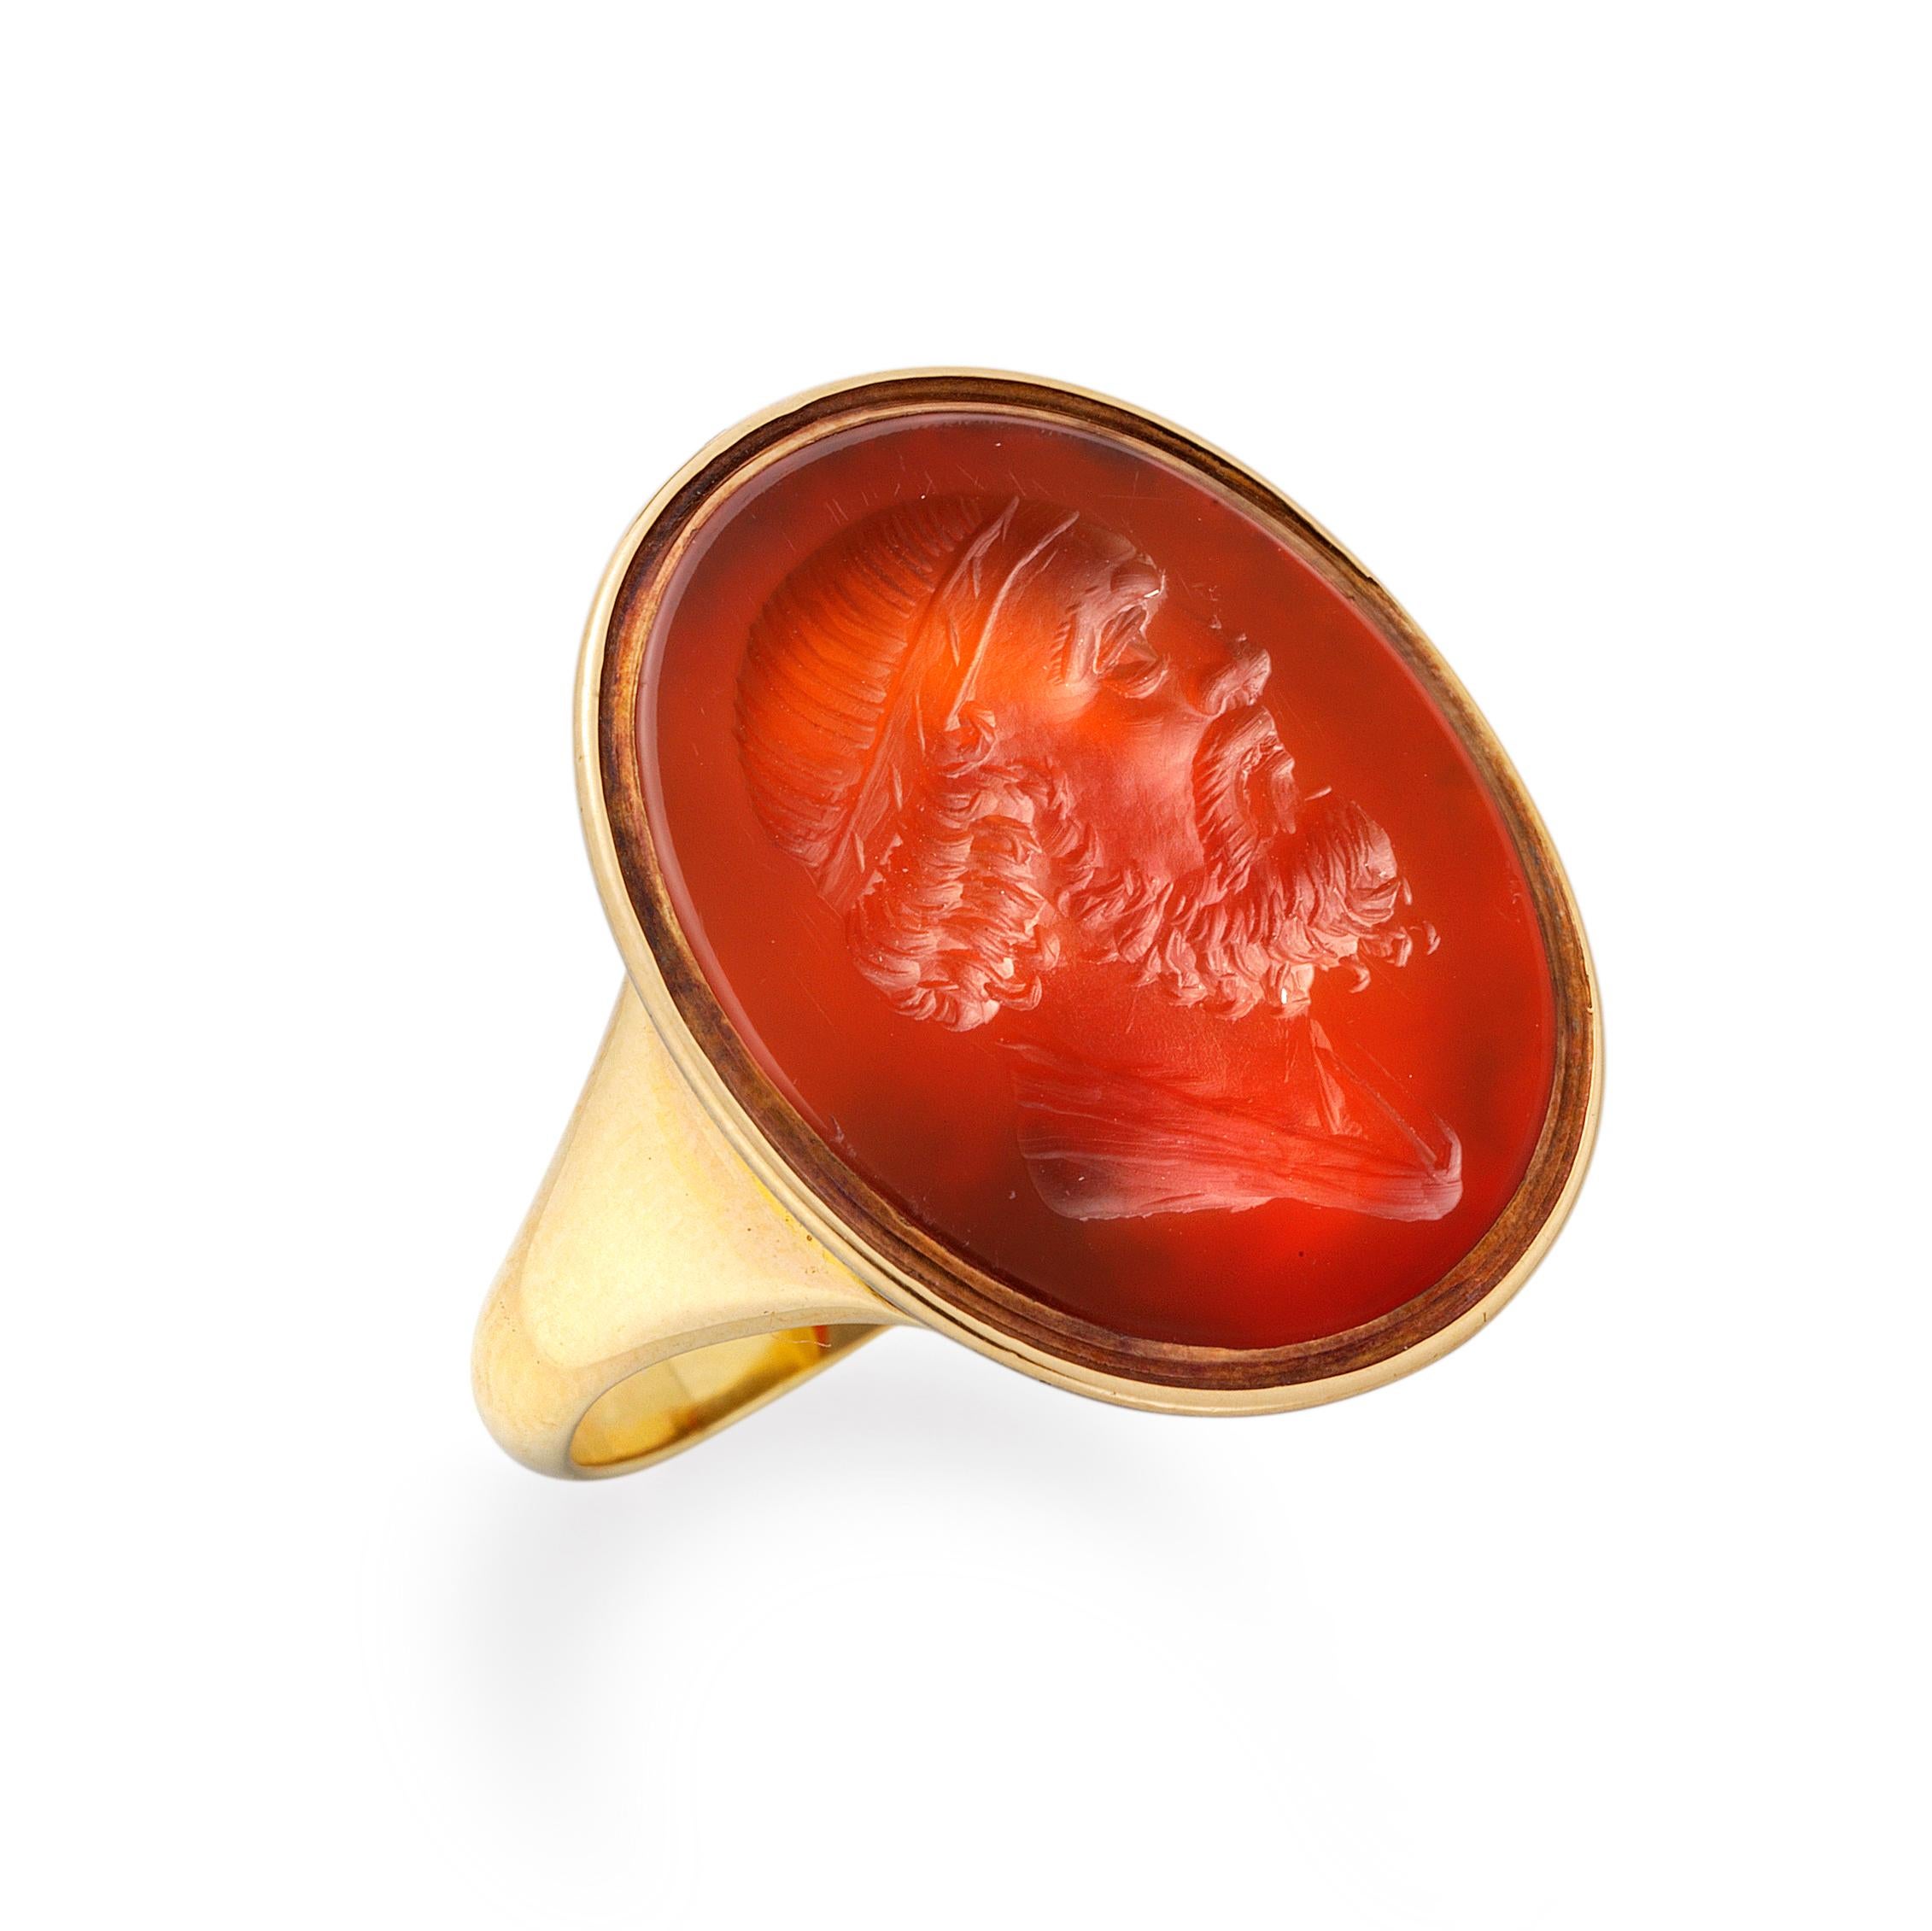 A Georgian carnelian intaglio ring, the oval cornelian measuring 21 x 18mm, seal-engraved with a classic male head, bearded and in profile, in a yellow gold setting with an open back and tapering gold shoulders.

The finger size of most of our rings